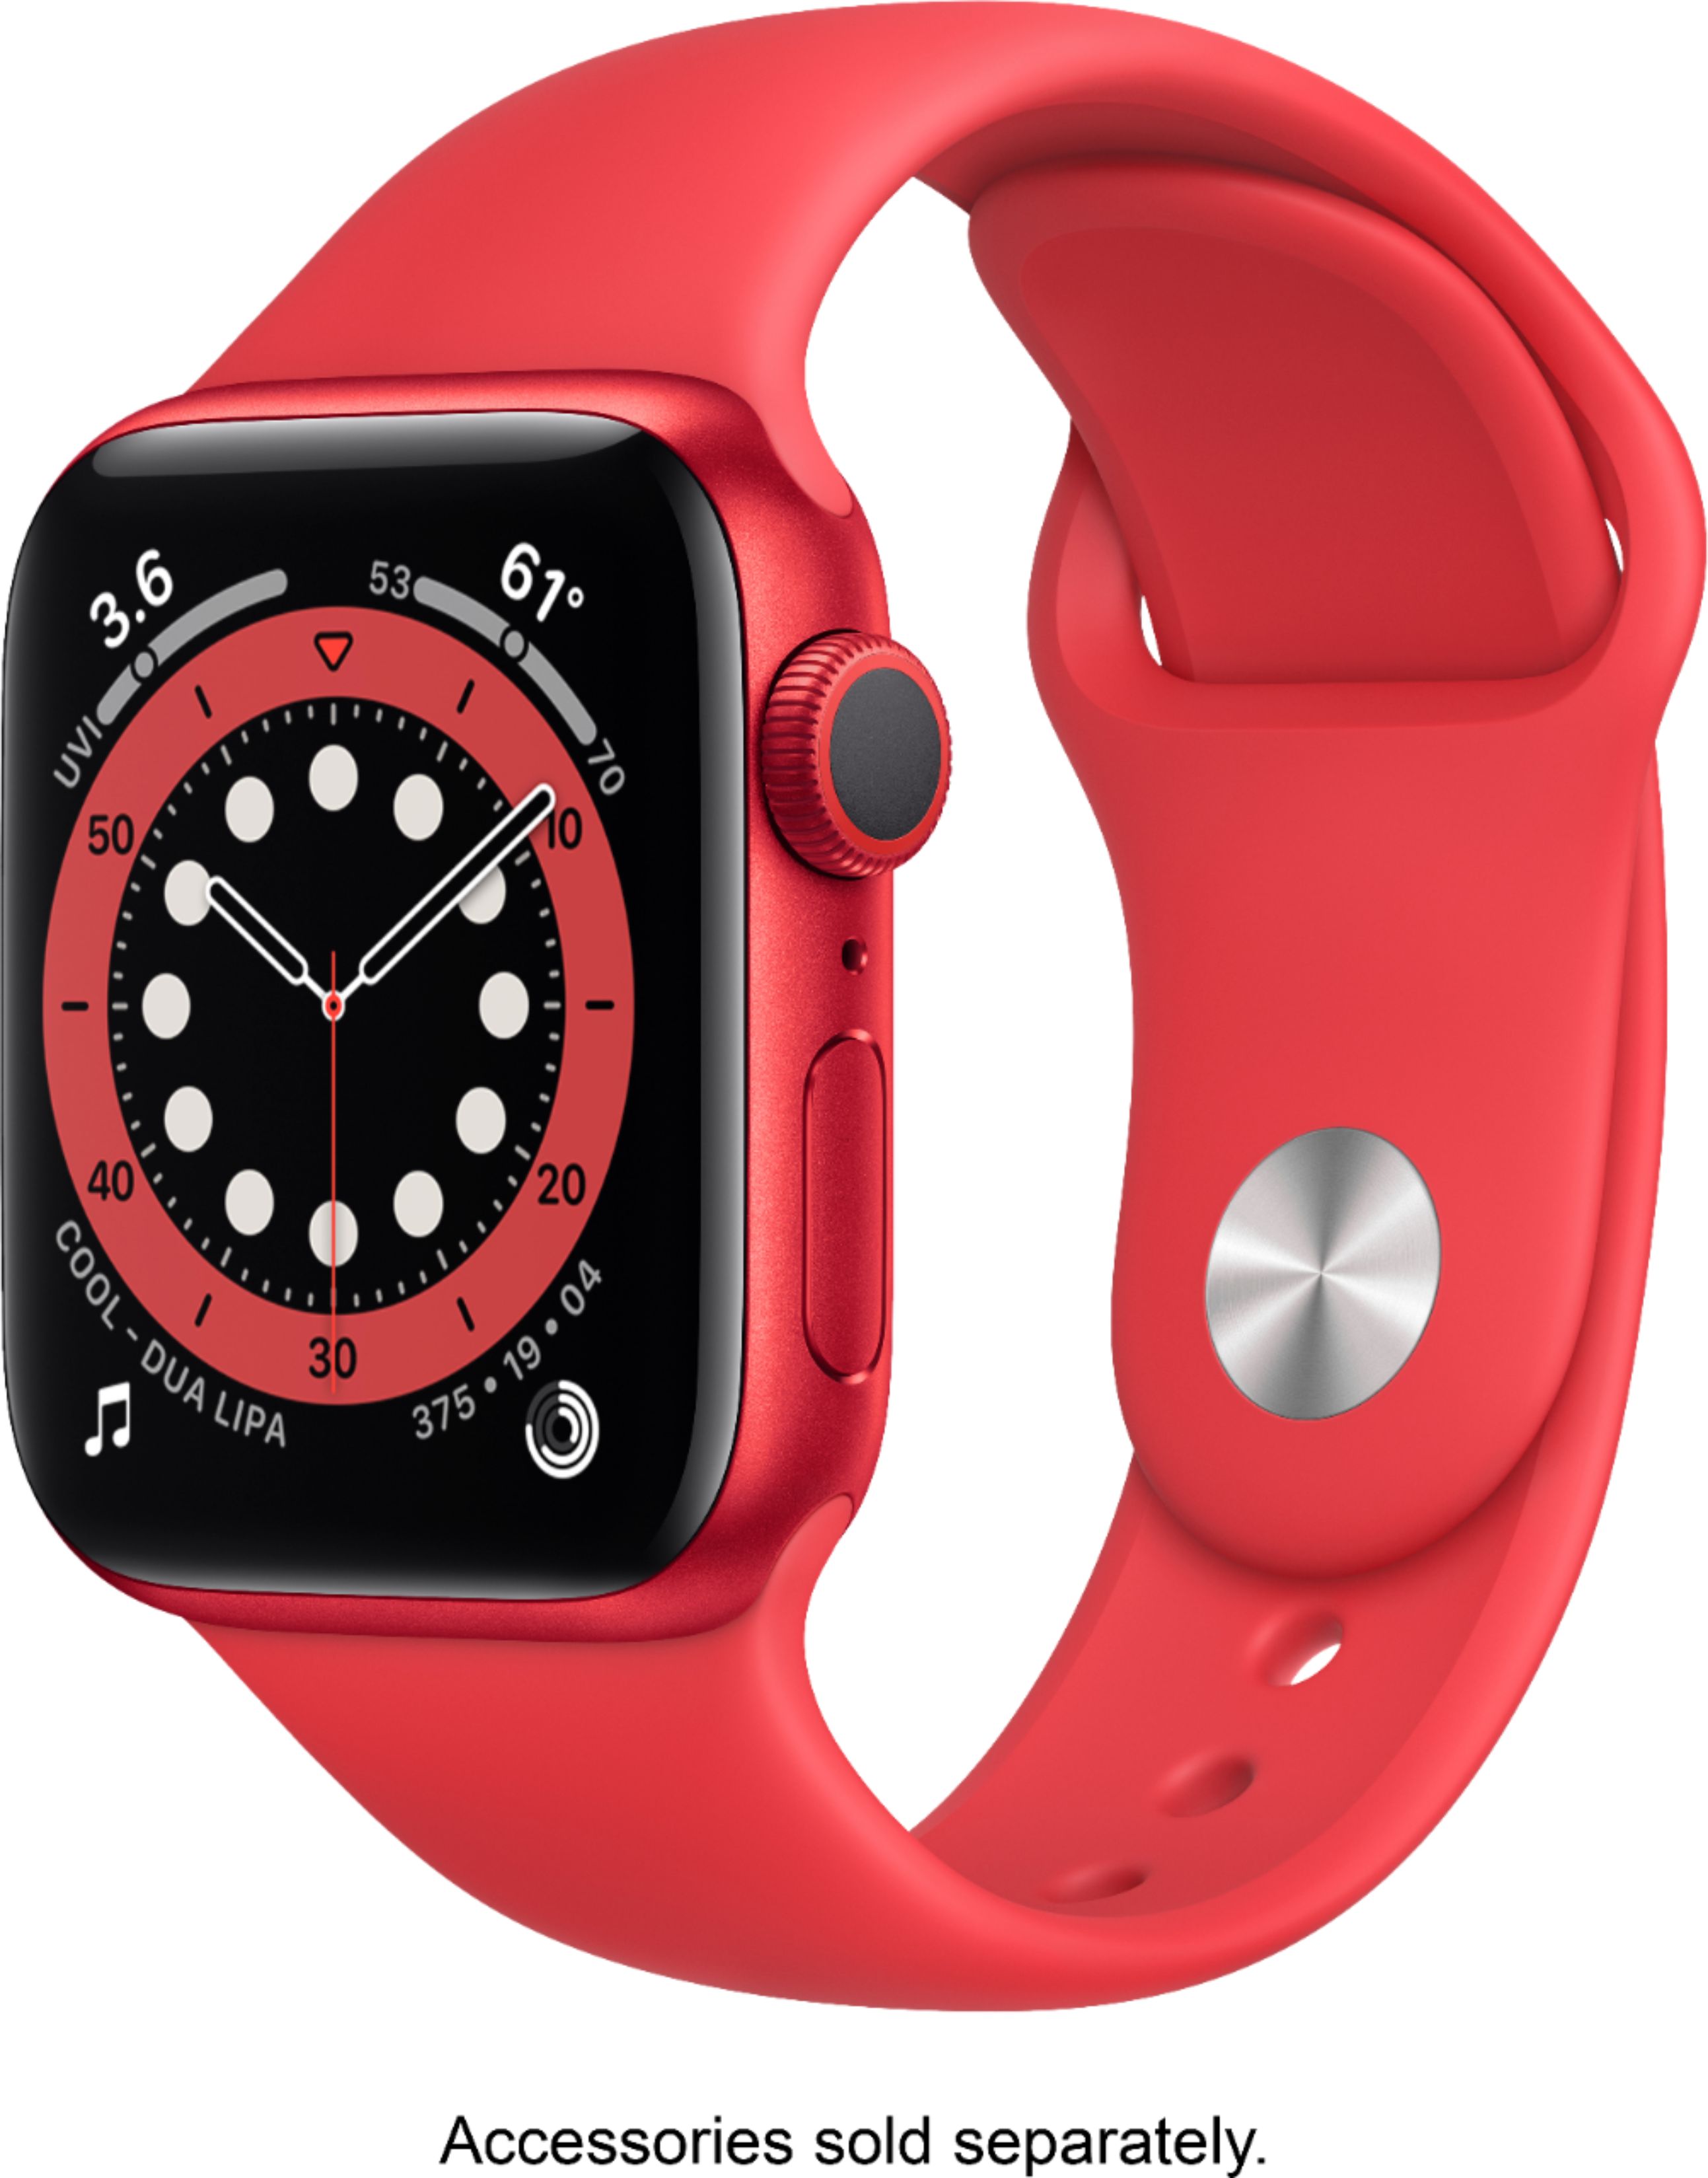 Zoom in on Front Zoom. Apple Watch Series 6 (GPS) 40mm (PRODUCT)RED Aluminum Case with (PRODUCT)RED Sport Band - (PRODUCT)RED.